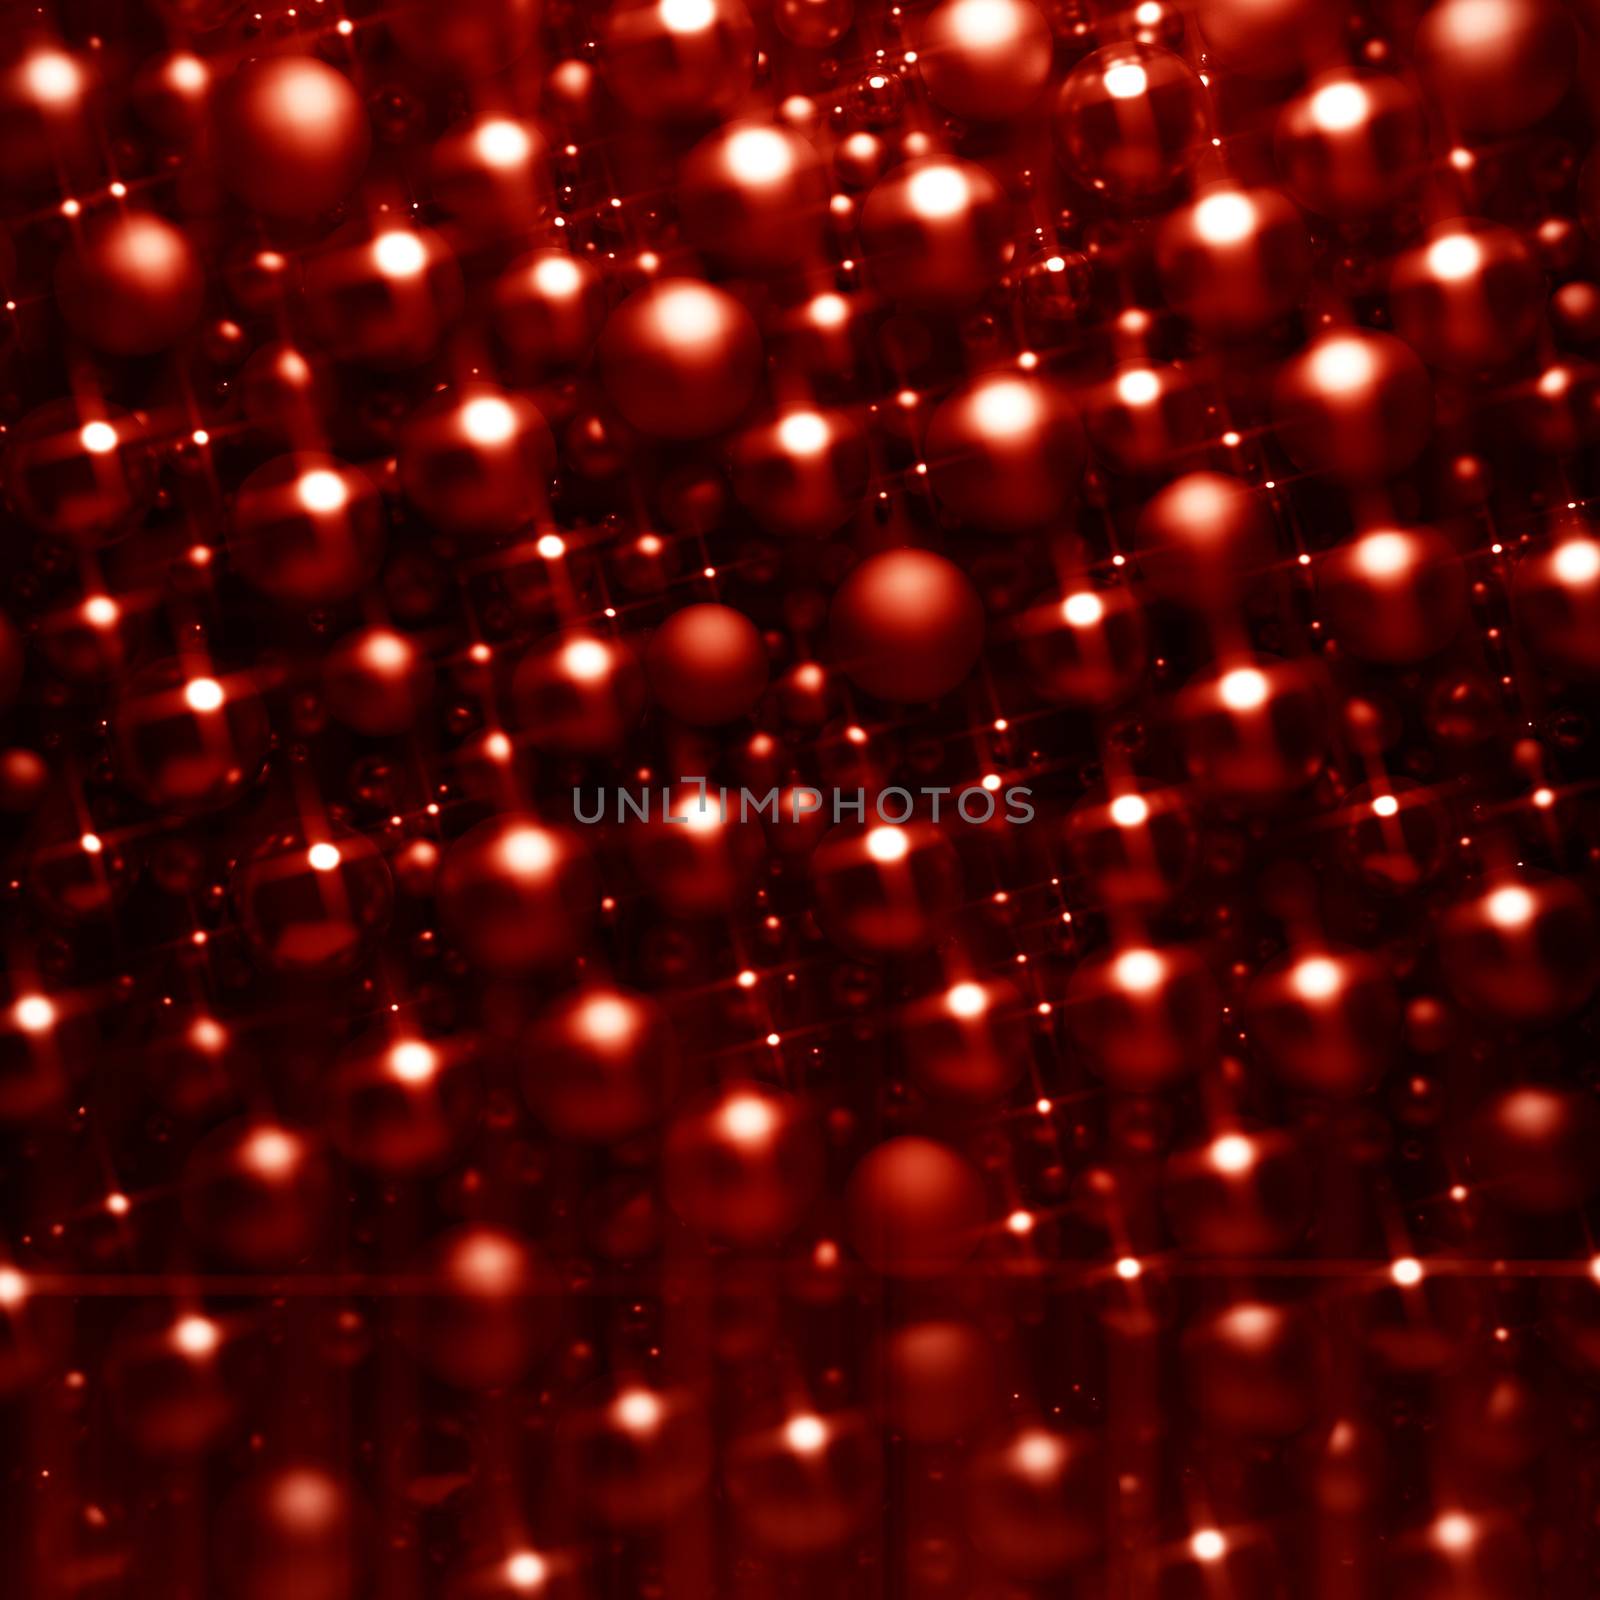 Red 3d shinning pearls background by 123dartist